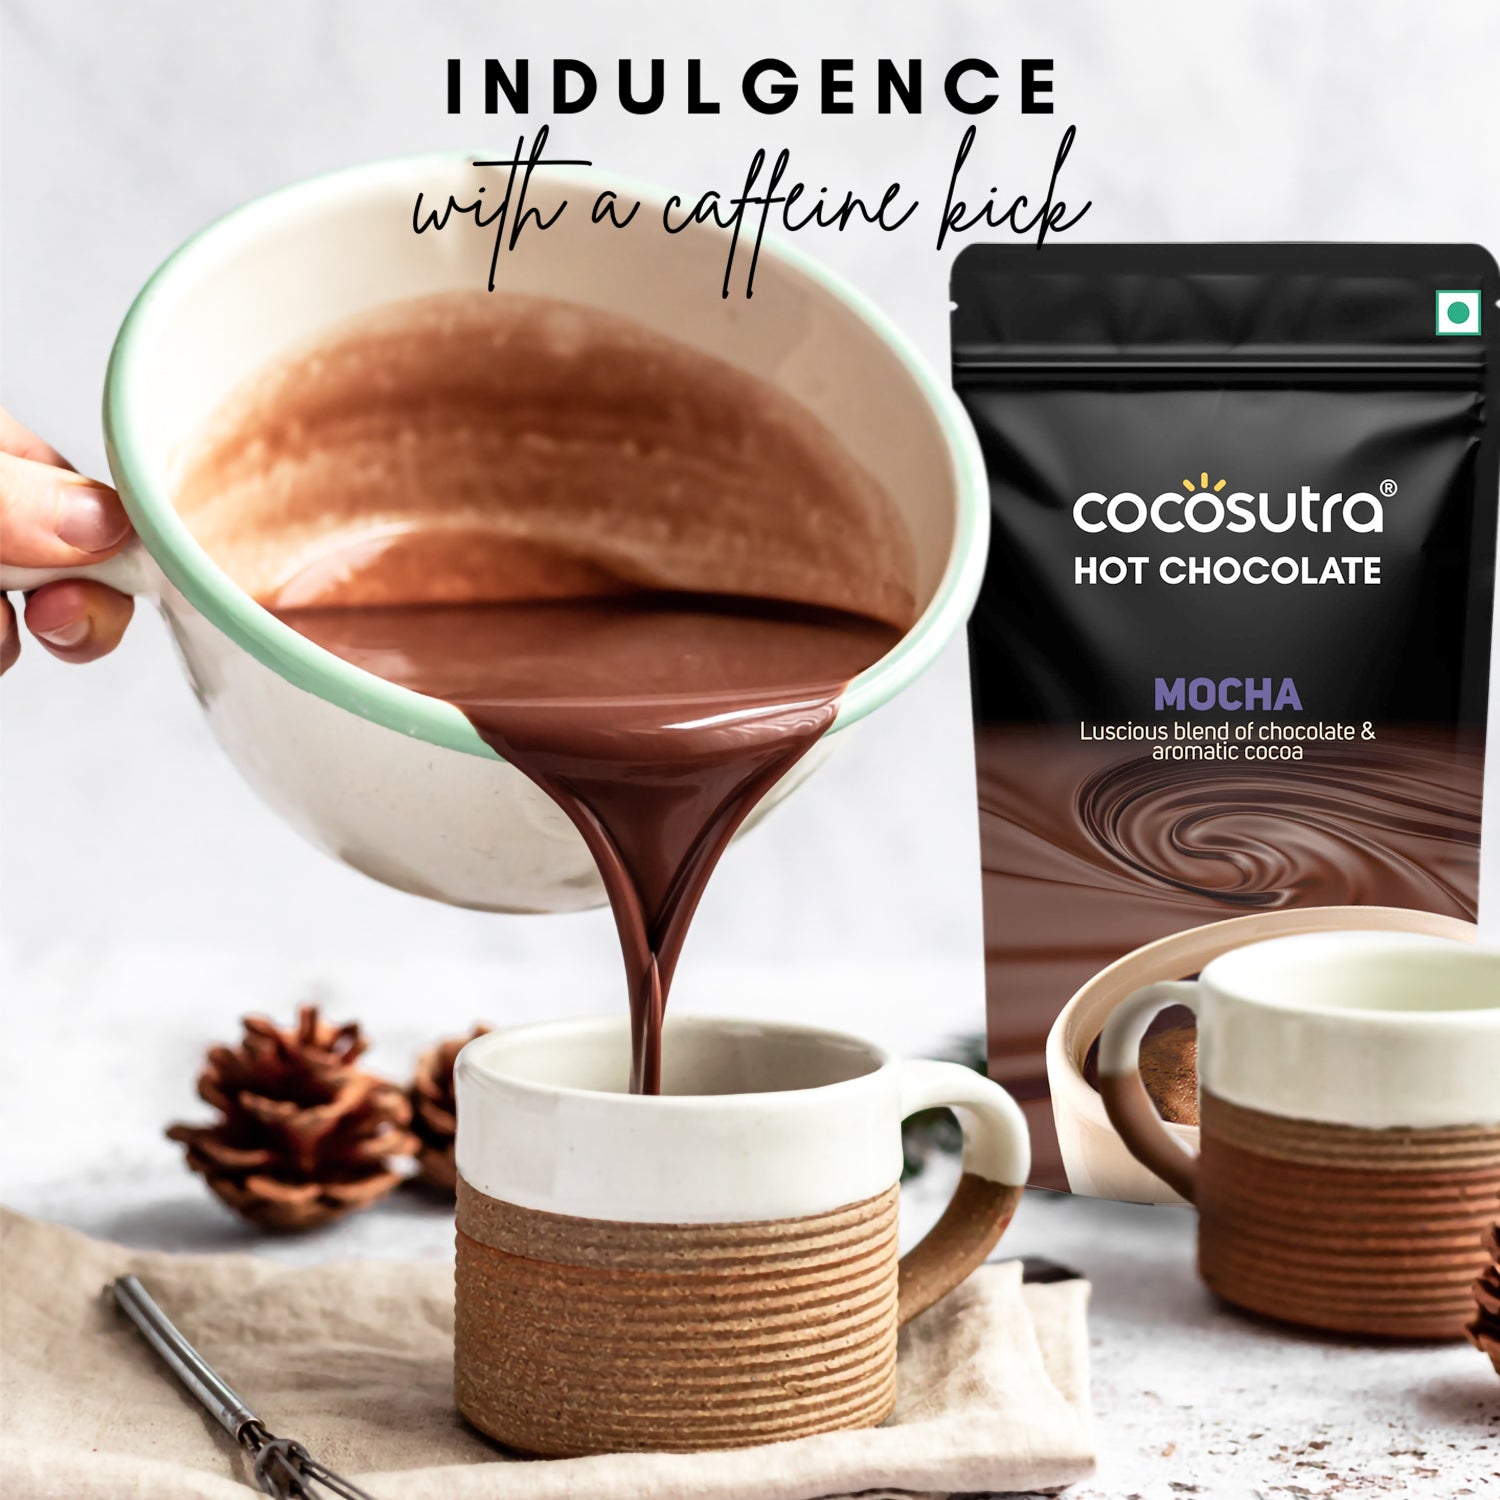 Hot Chocolate Mix Collection | 6 Flavors in 1 Pack | 100 g each